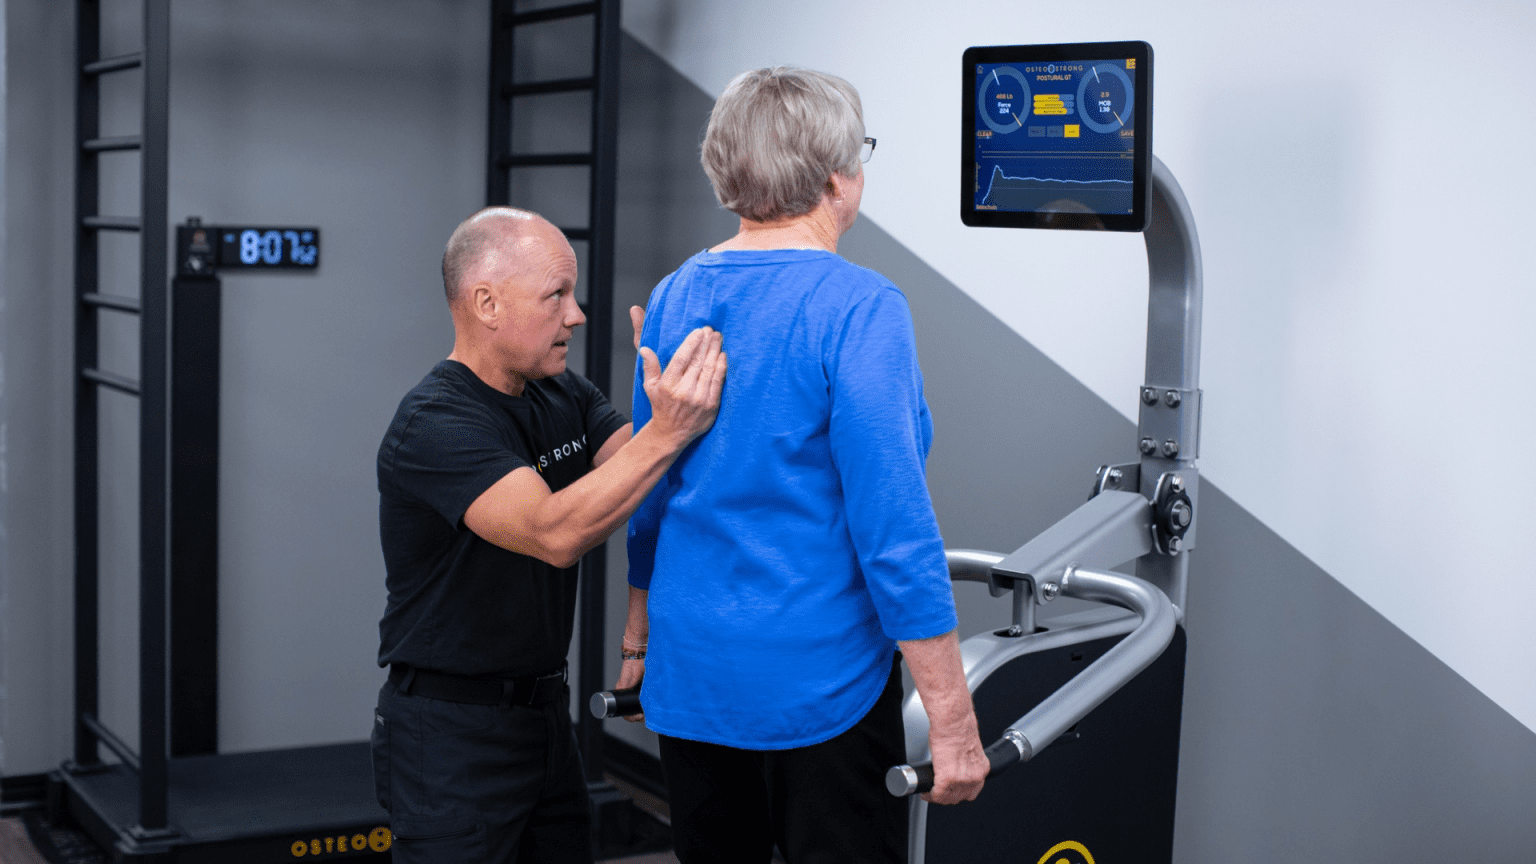 A man in an OsteoStrong shirt helps an older woman use an exercise machine, demonstrating proper technique. The screen on the machine displays exercise metrics.